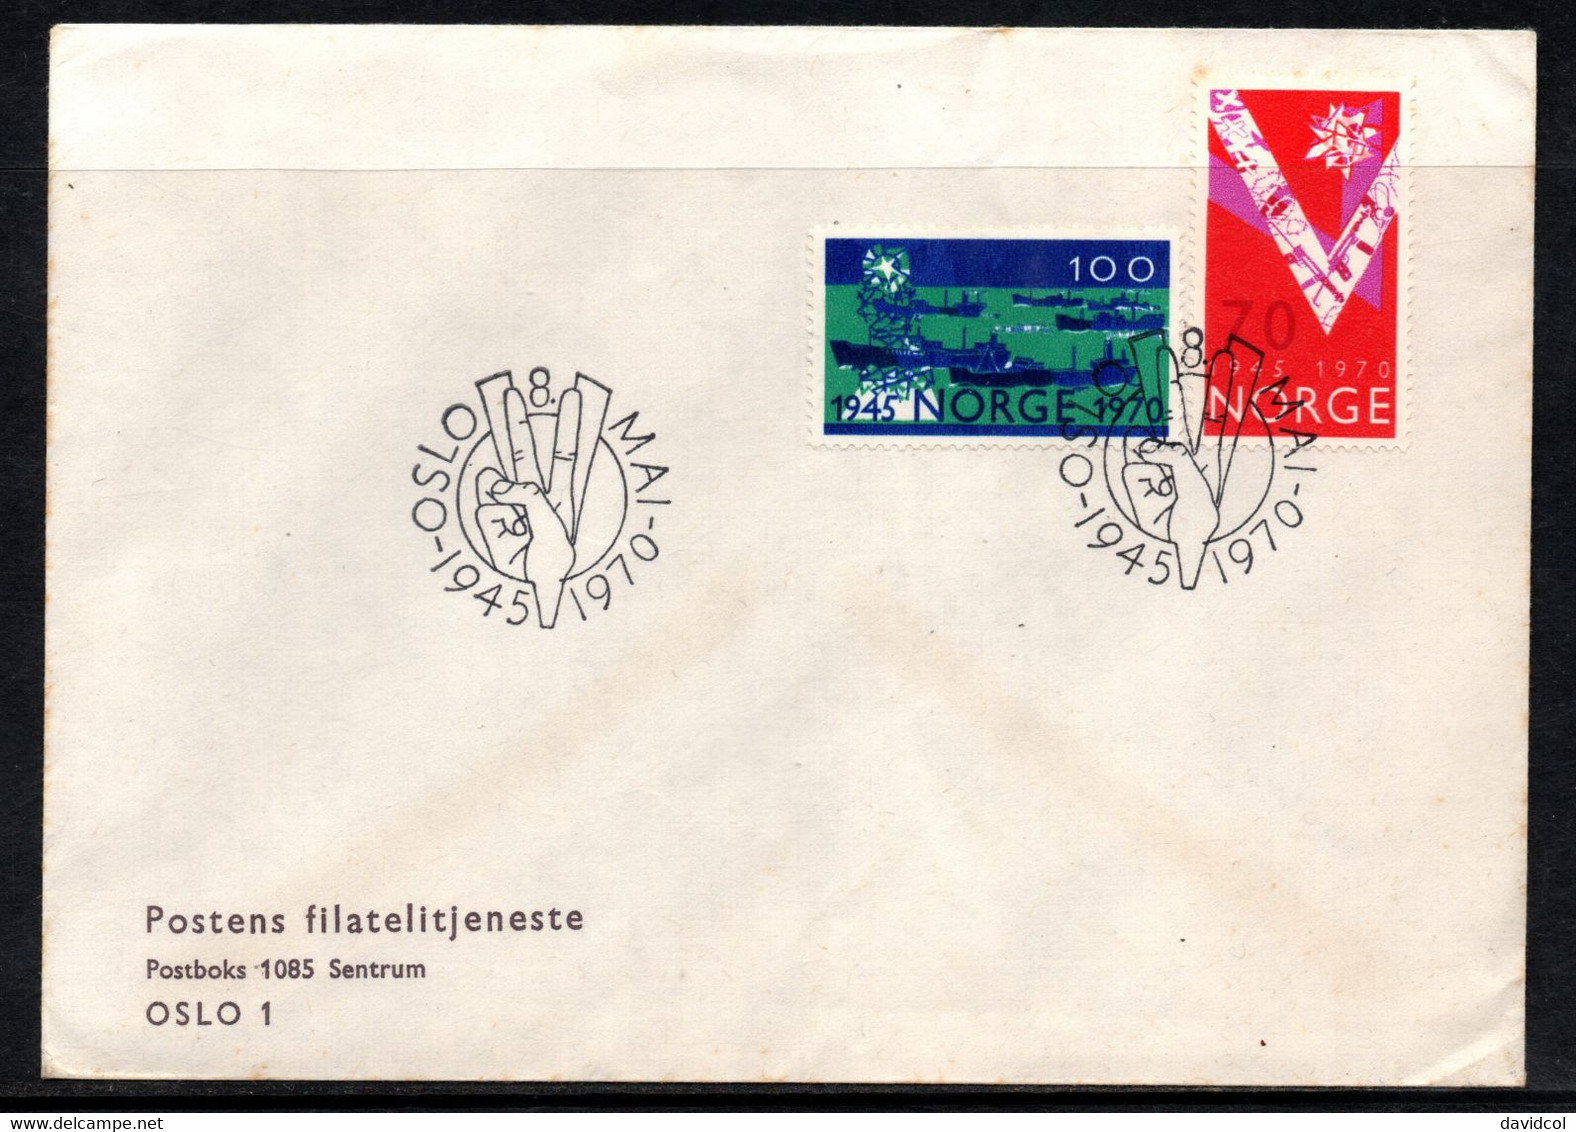 CA190- COVERAUCTION!!! - NORWAY 1970 - OSLO 8-5-70- NORWAY LIBERATION FROM THE GERMANS, 25TH ANNIVERSARY - Cartas & Documentos